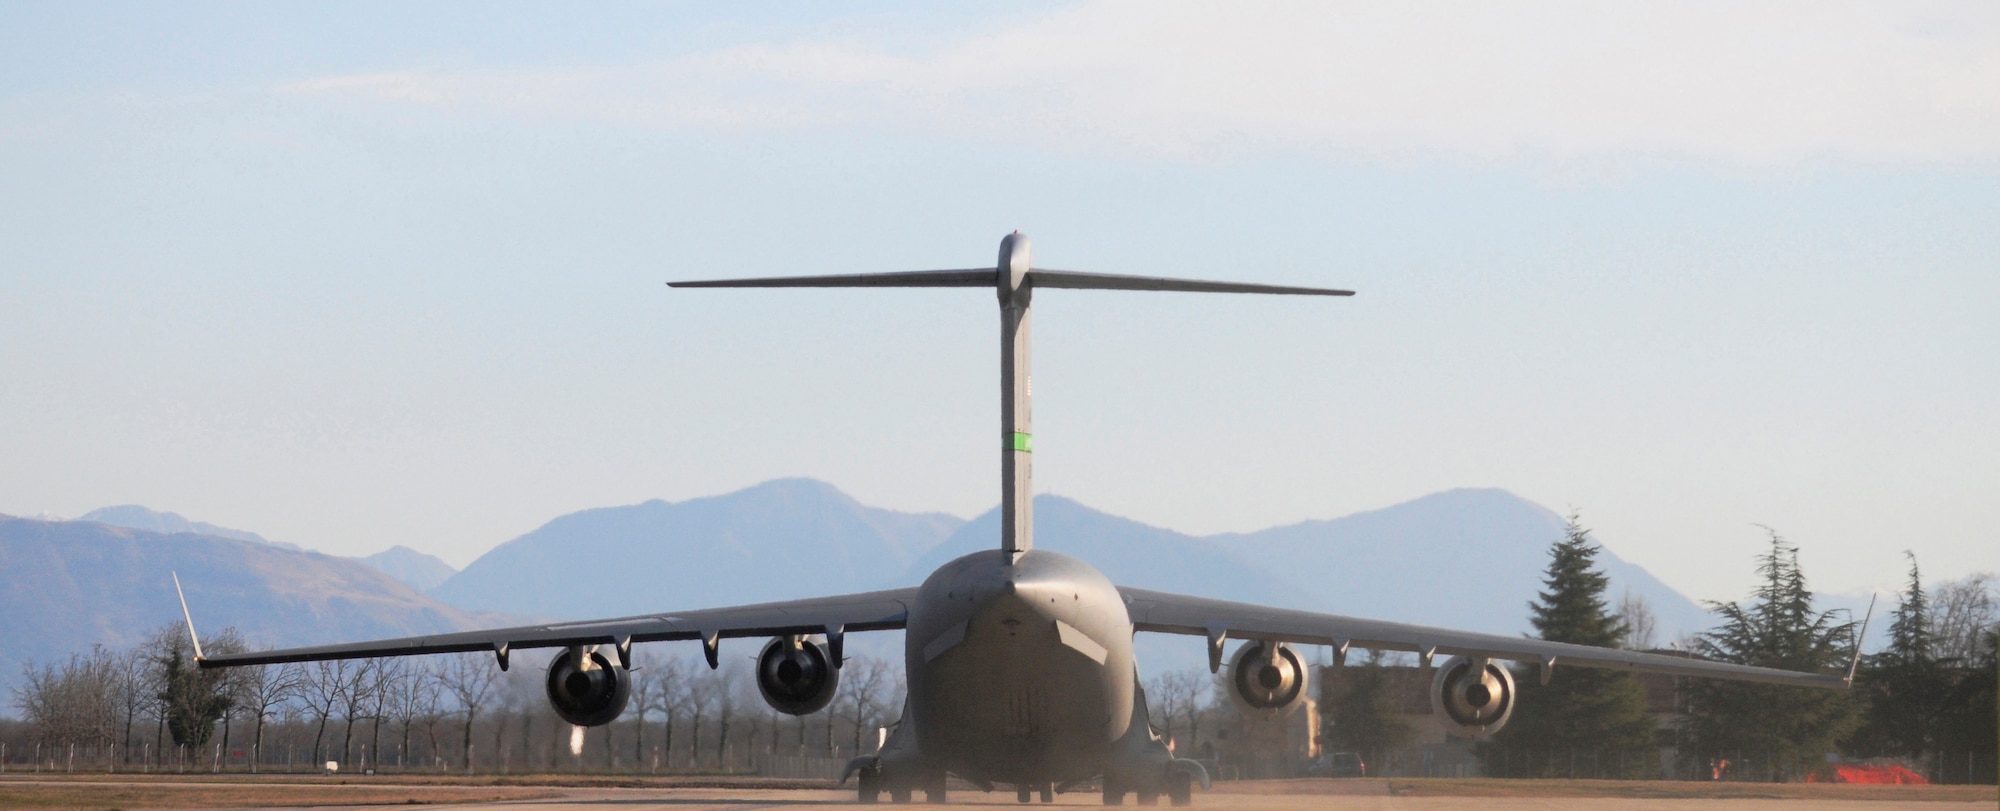 Photo essay: Joint Base Lewis-McChord C-17 lands at Aviano for